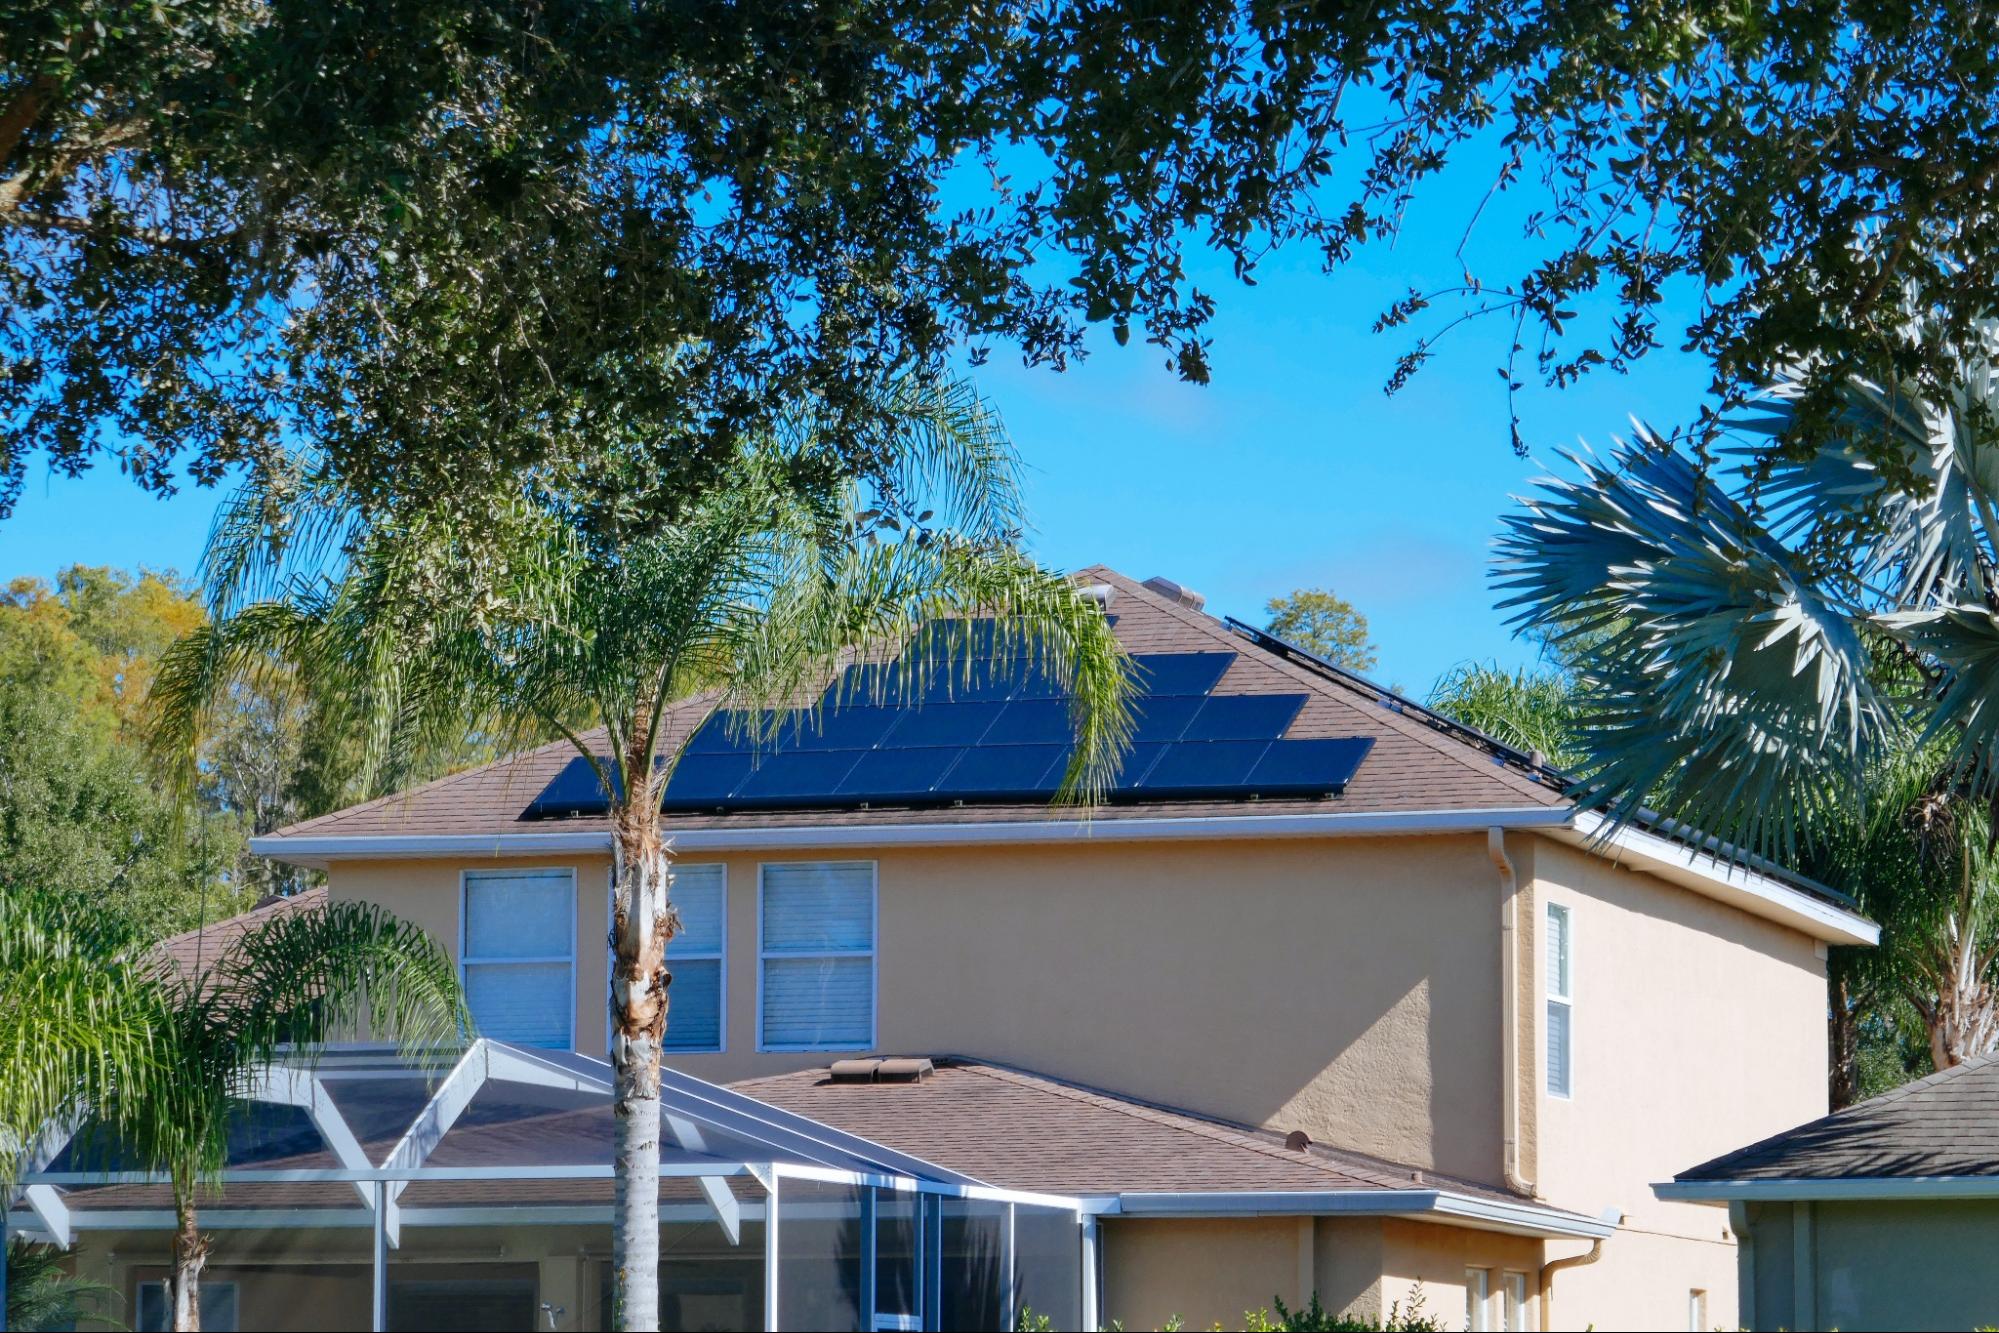 Solar panels on roof in Florida